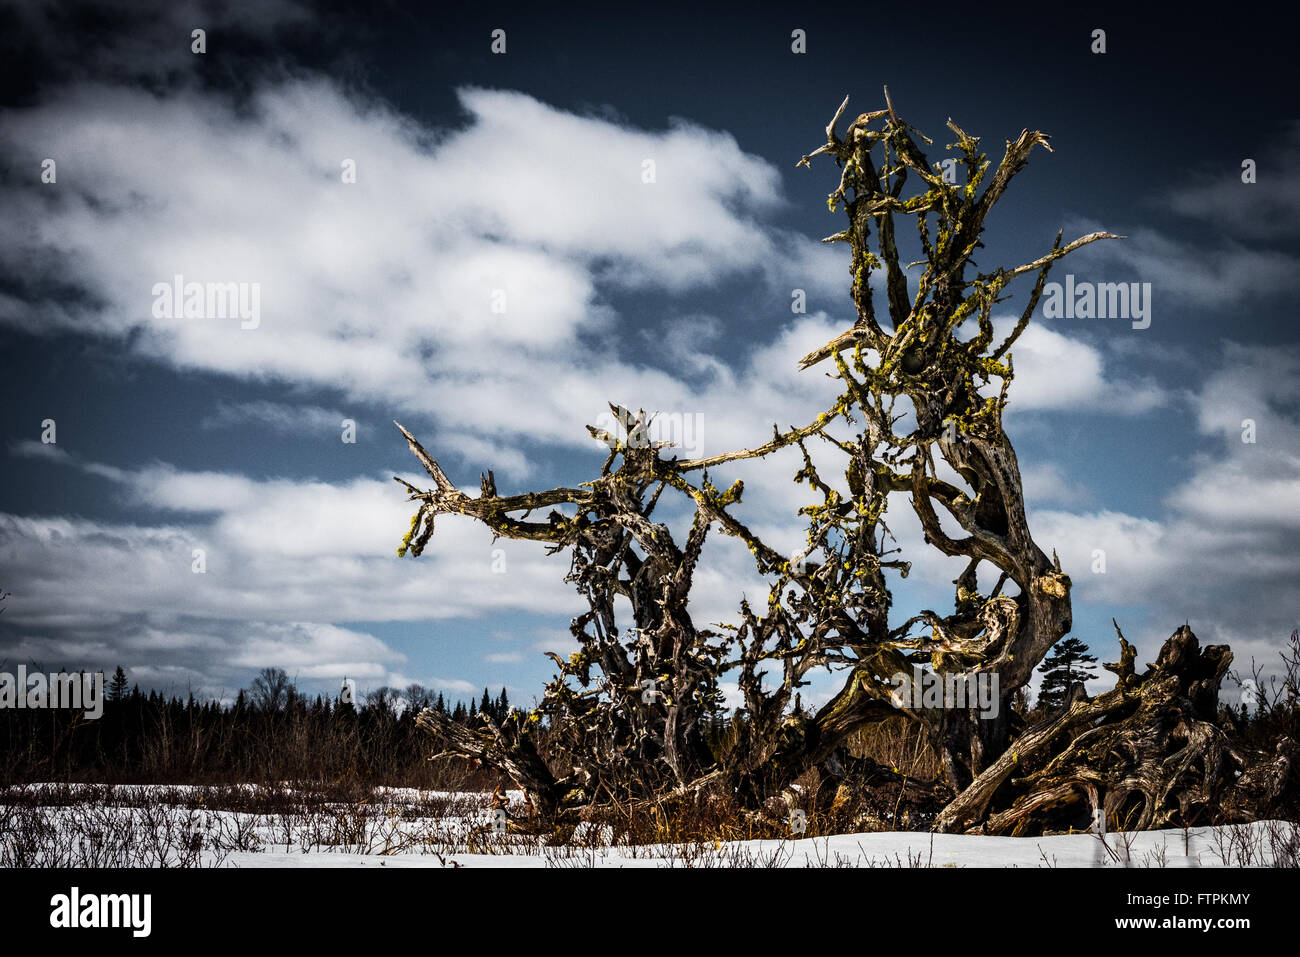 Roots of a fallen tree extend skeleton like towards the  sky where a brook empties into a lake.  The roots seem to point out over the frozen lake. Stock Photo